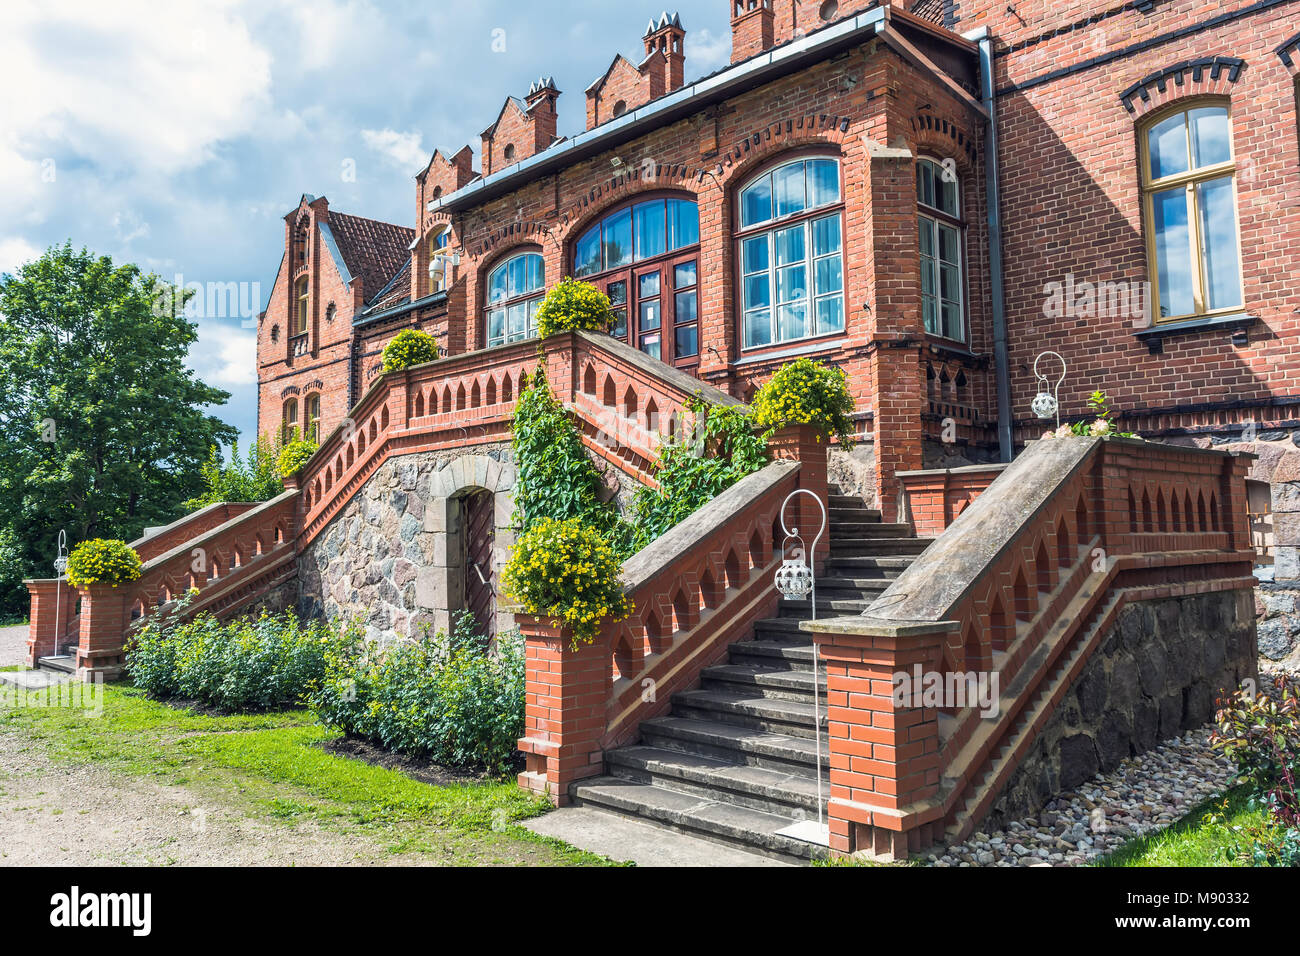 Jaunmokas manor porch. This Neo-Gothic palace was designed by architect Wilhelm Bockslaff and built in 1901. Stock Photo